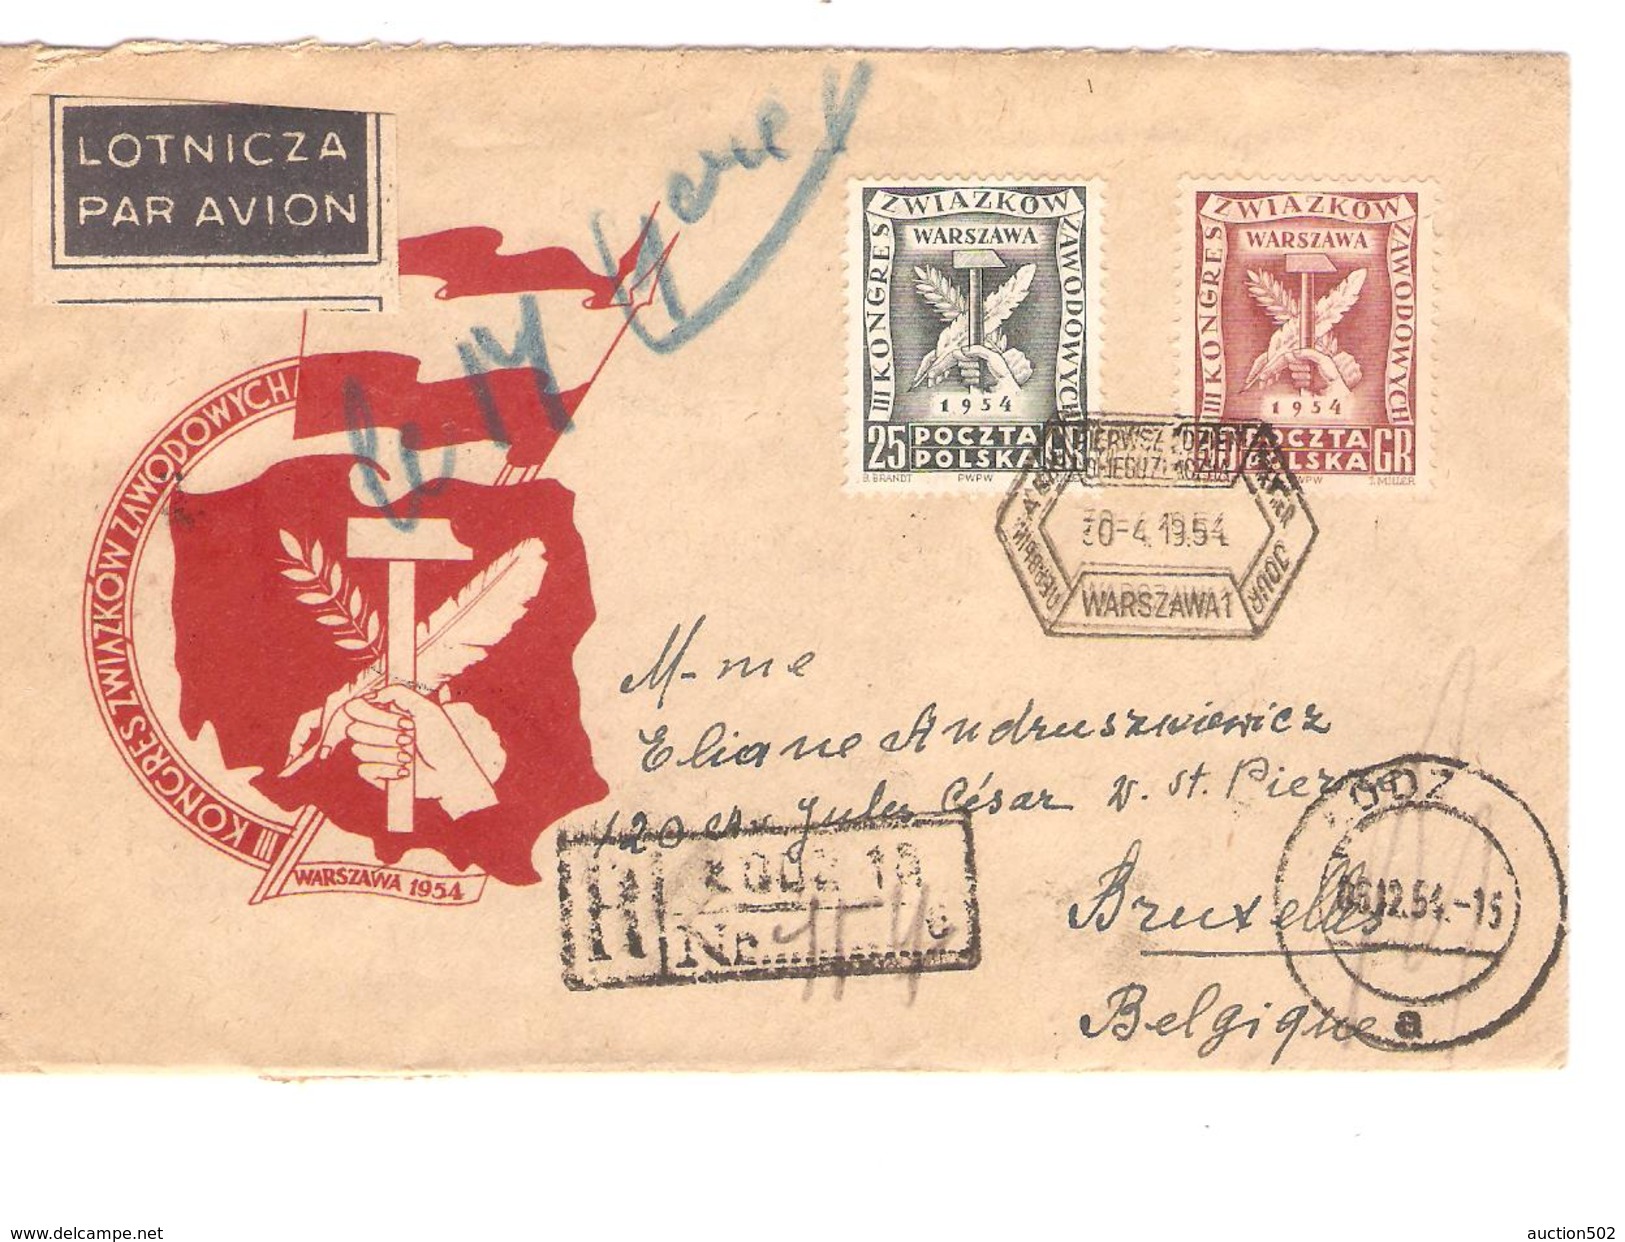 Polska-Pologne Air Mail Registered Cover Lodz Waraszawa 1954 To Brussels Belgium PR3908 - Lettres & Documents